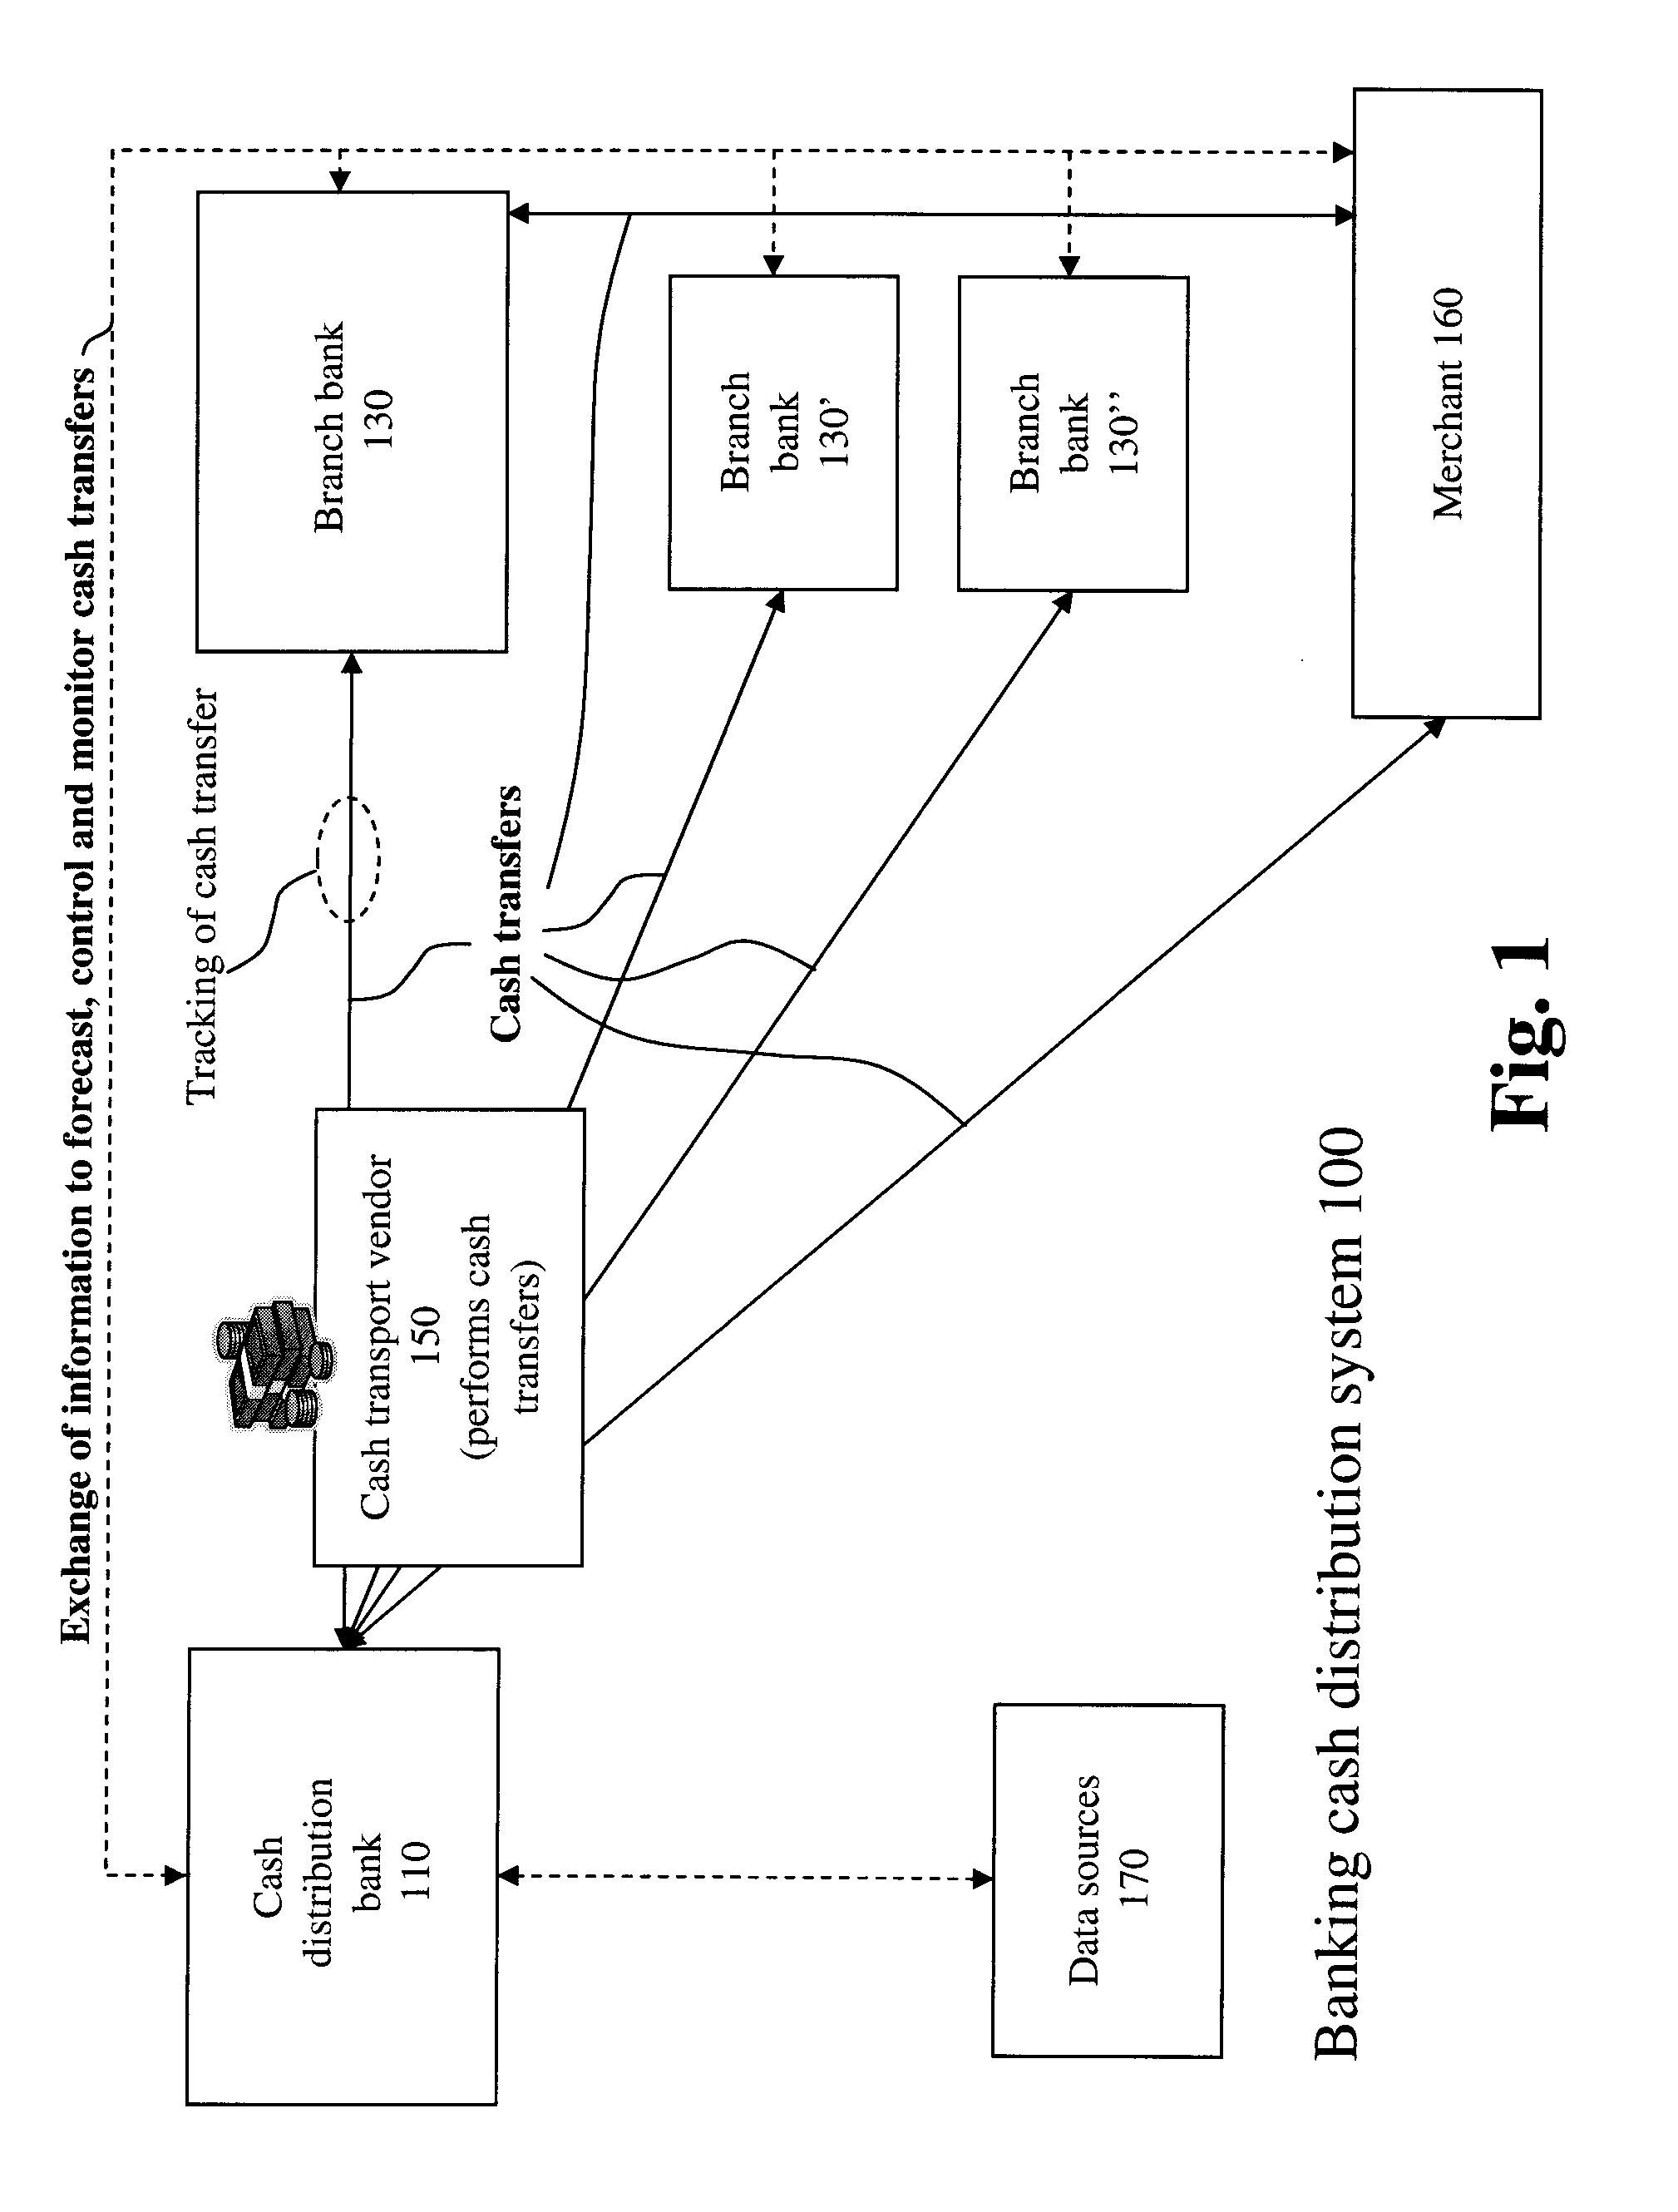 Systems and methods for distribution of cash